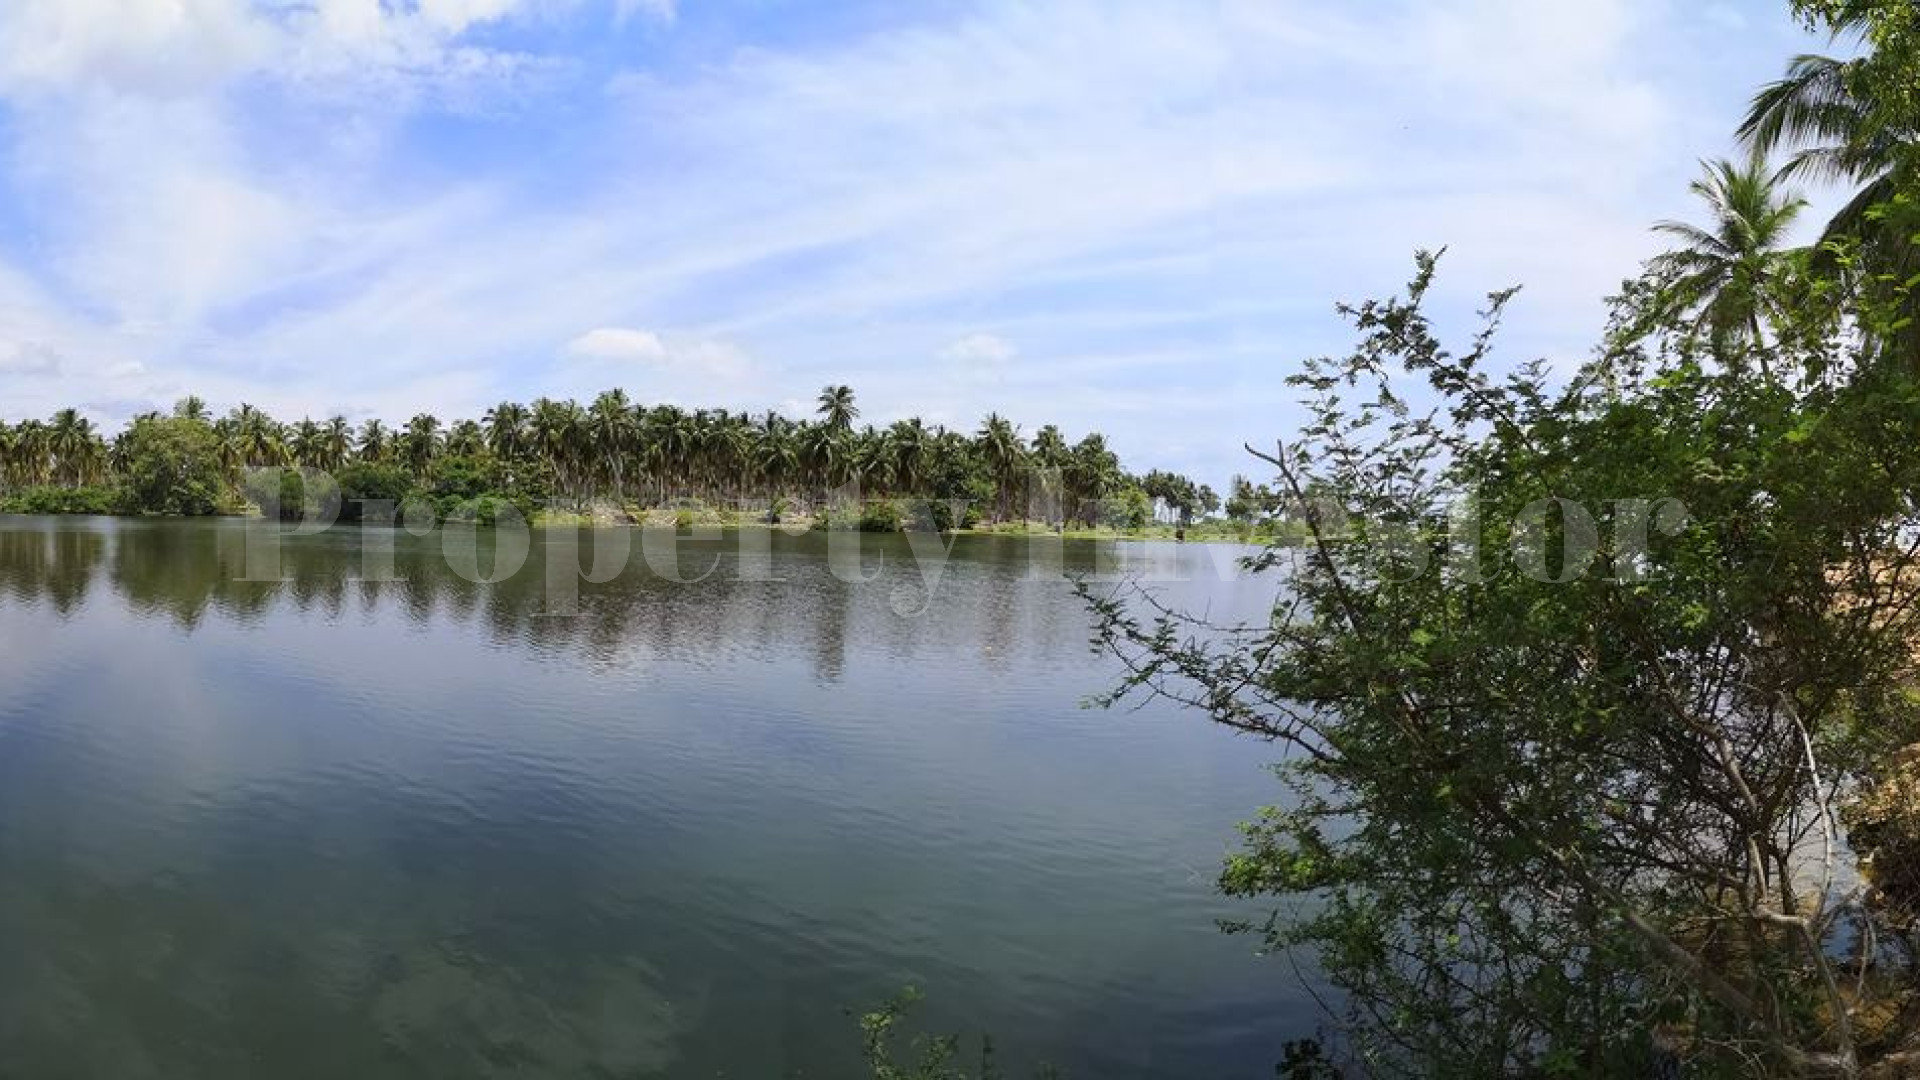 Exclusive 1 Hectare Beachfront Parcel of Land for Sale on a Private Peninsula in Sri Lanka